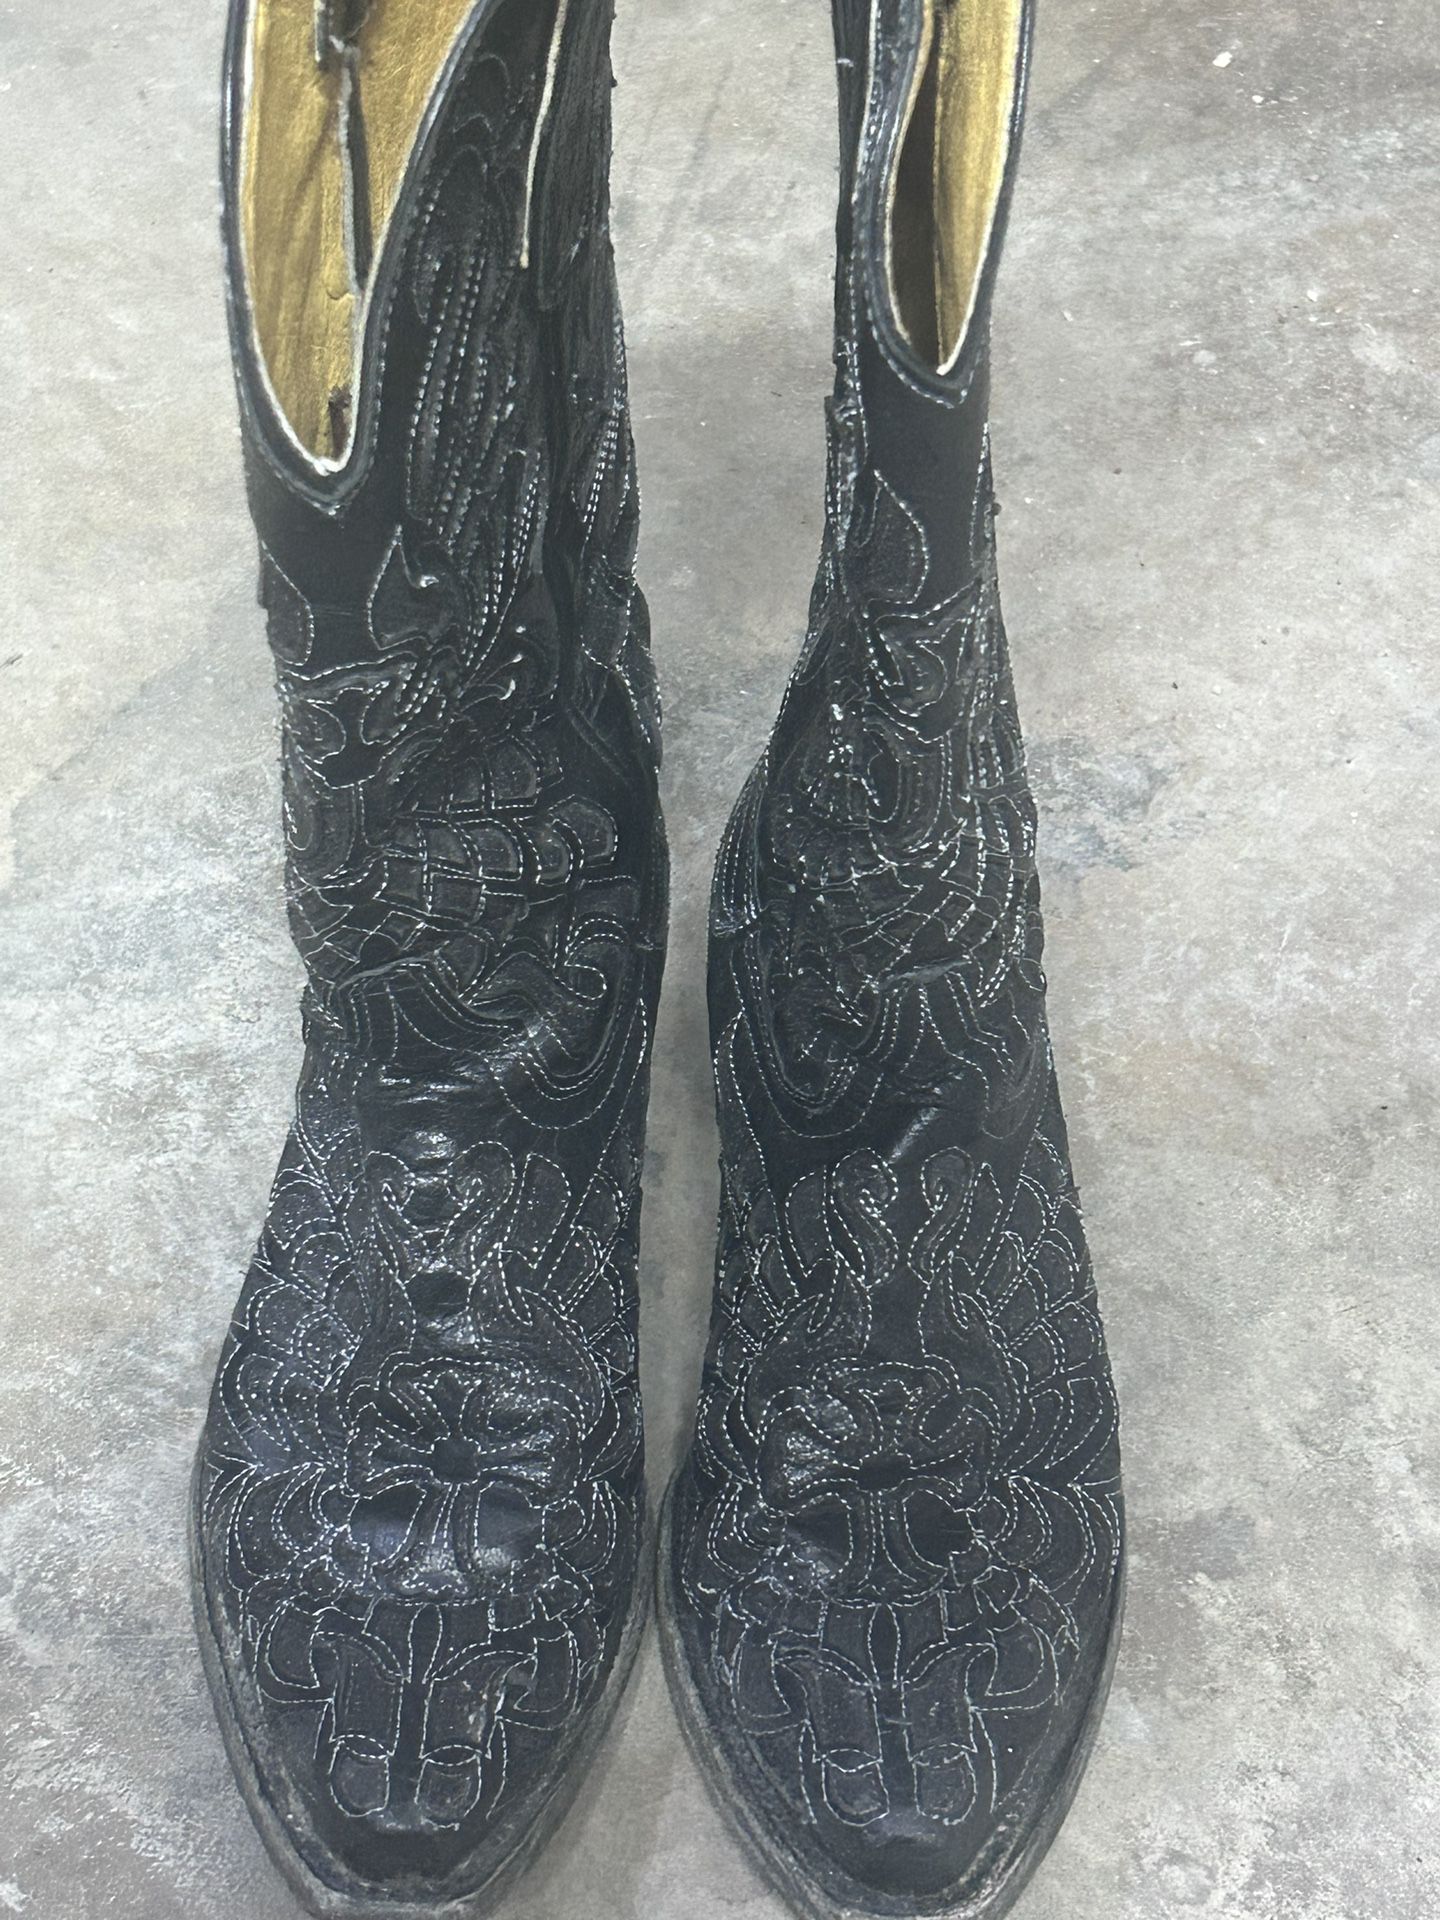 Women’s Corral Country Boots